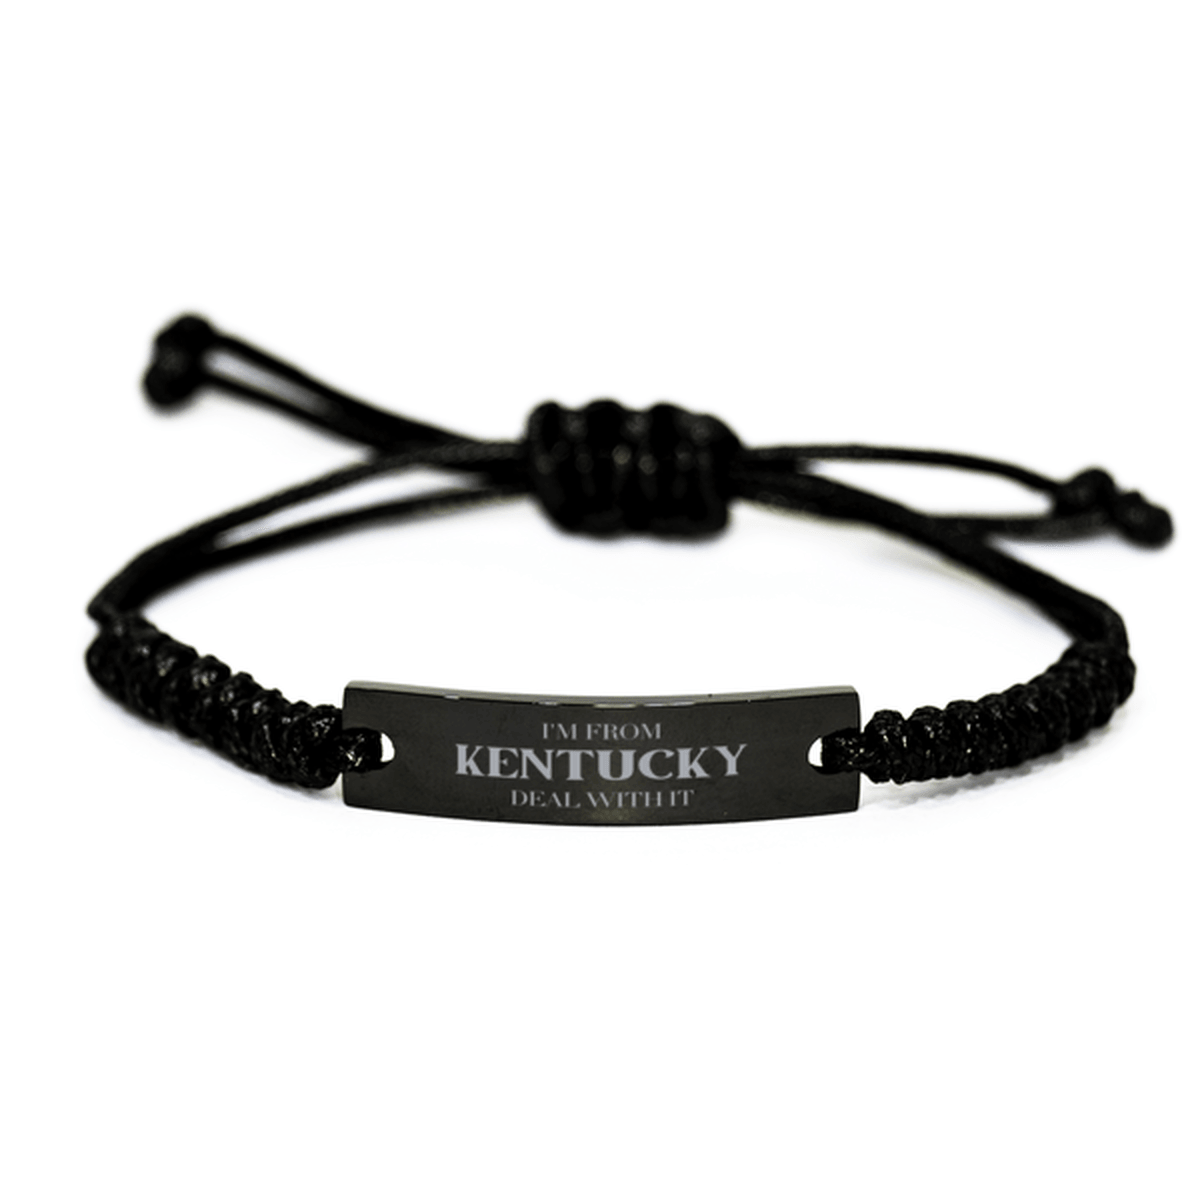 I'm from Kentucky, Deal with it, Proud Kentucky State Gifts, Kentucky Black Rope Bracelet Gift Idea, Christmas Gifts for Kentucky People, Coworkers, Colleague - Mallard Moon Gift Shop